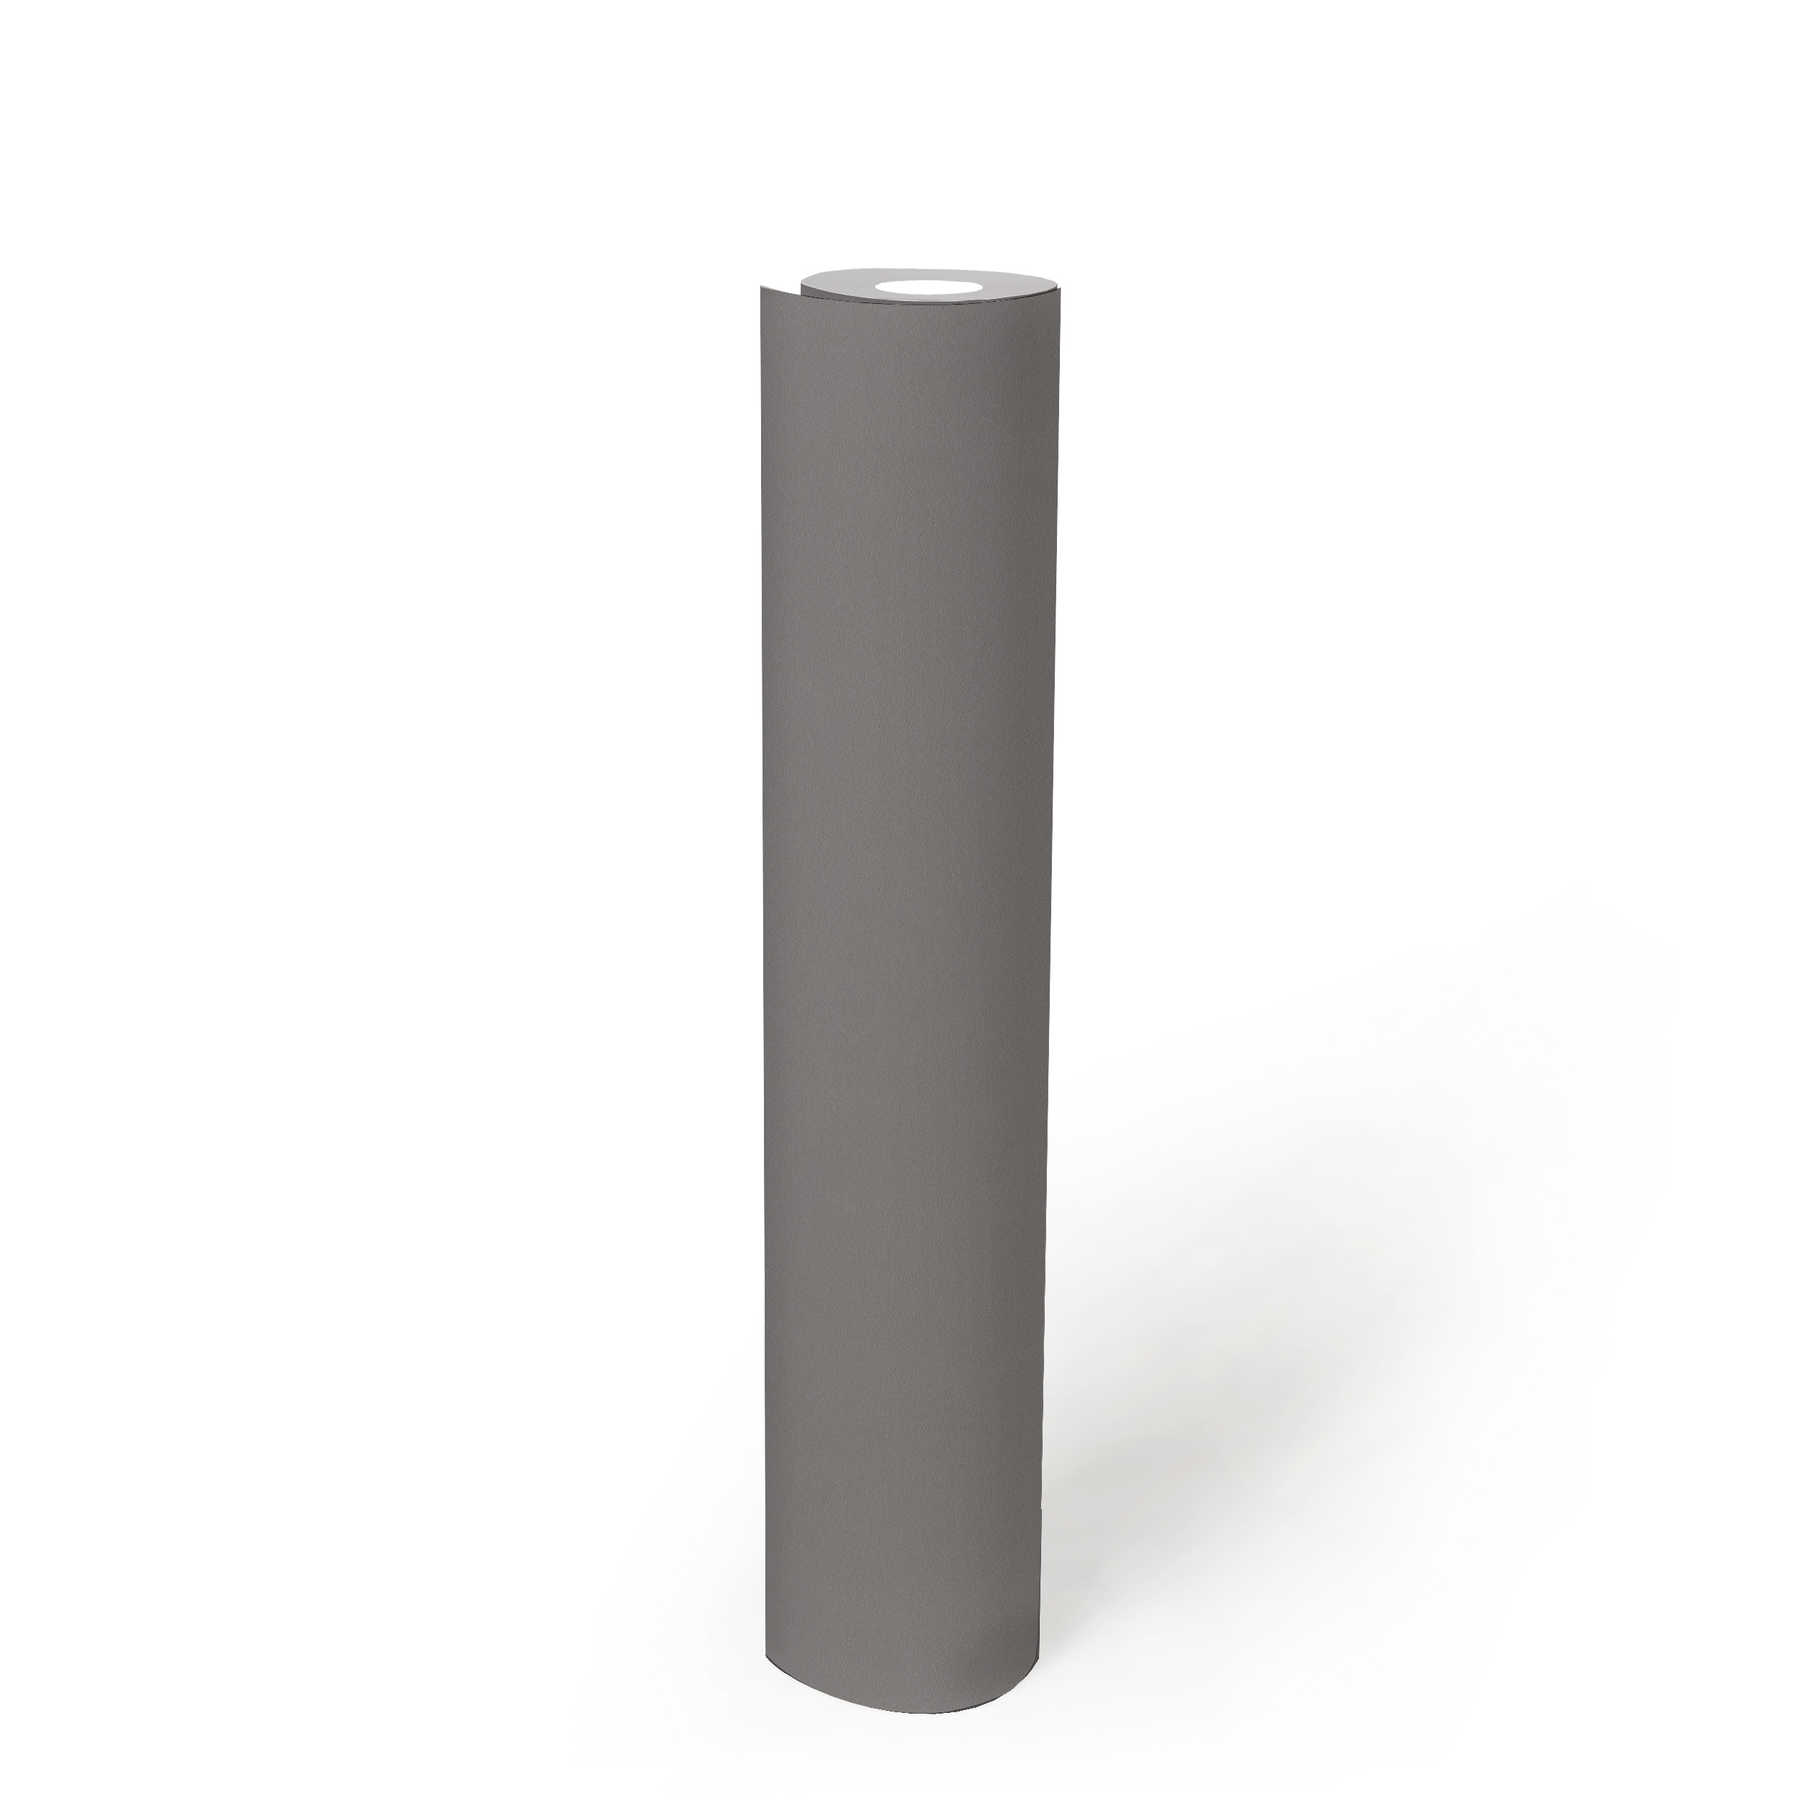             Non-woven wallpaper grey plain with flat structure & matte surface
        